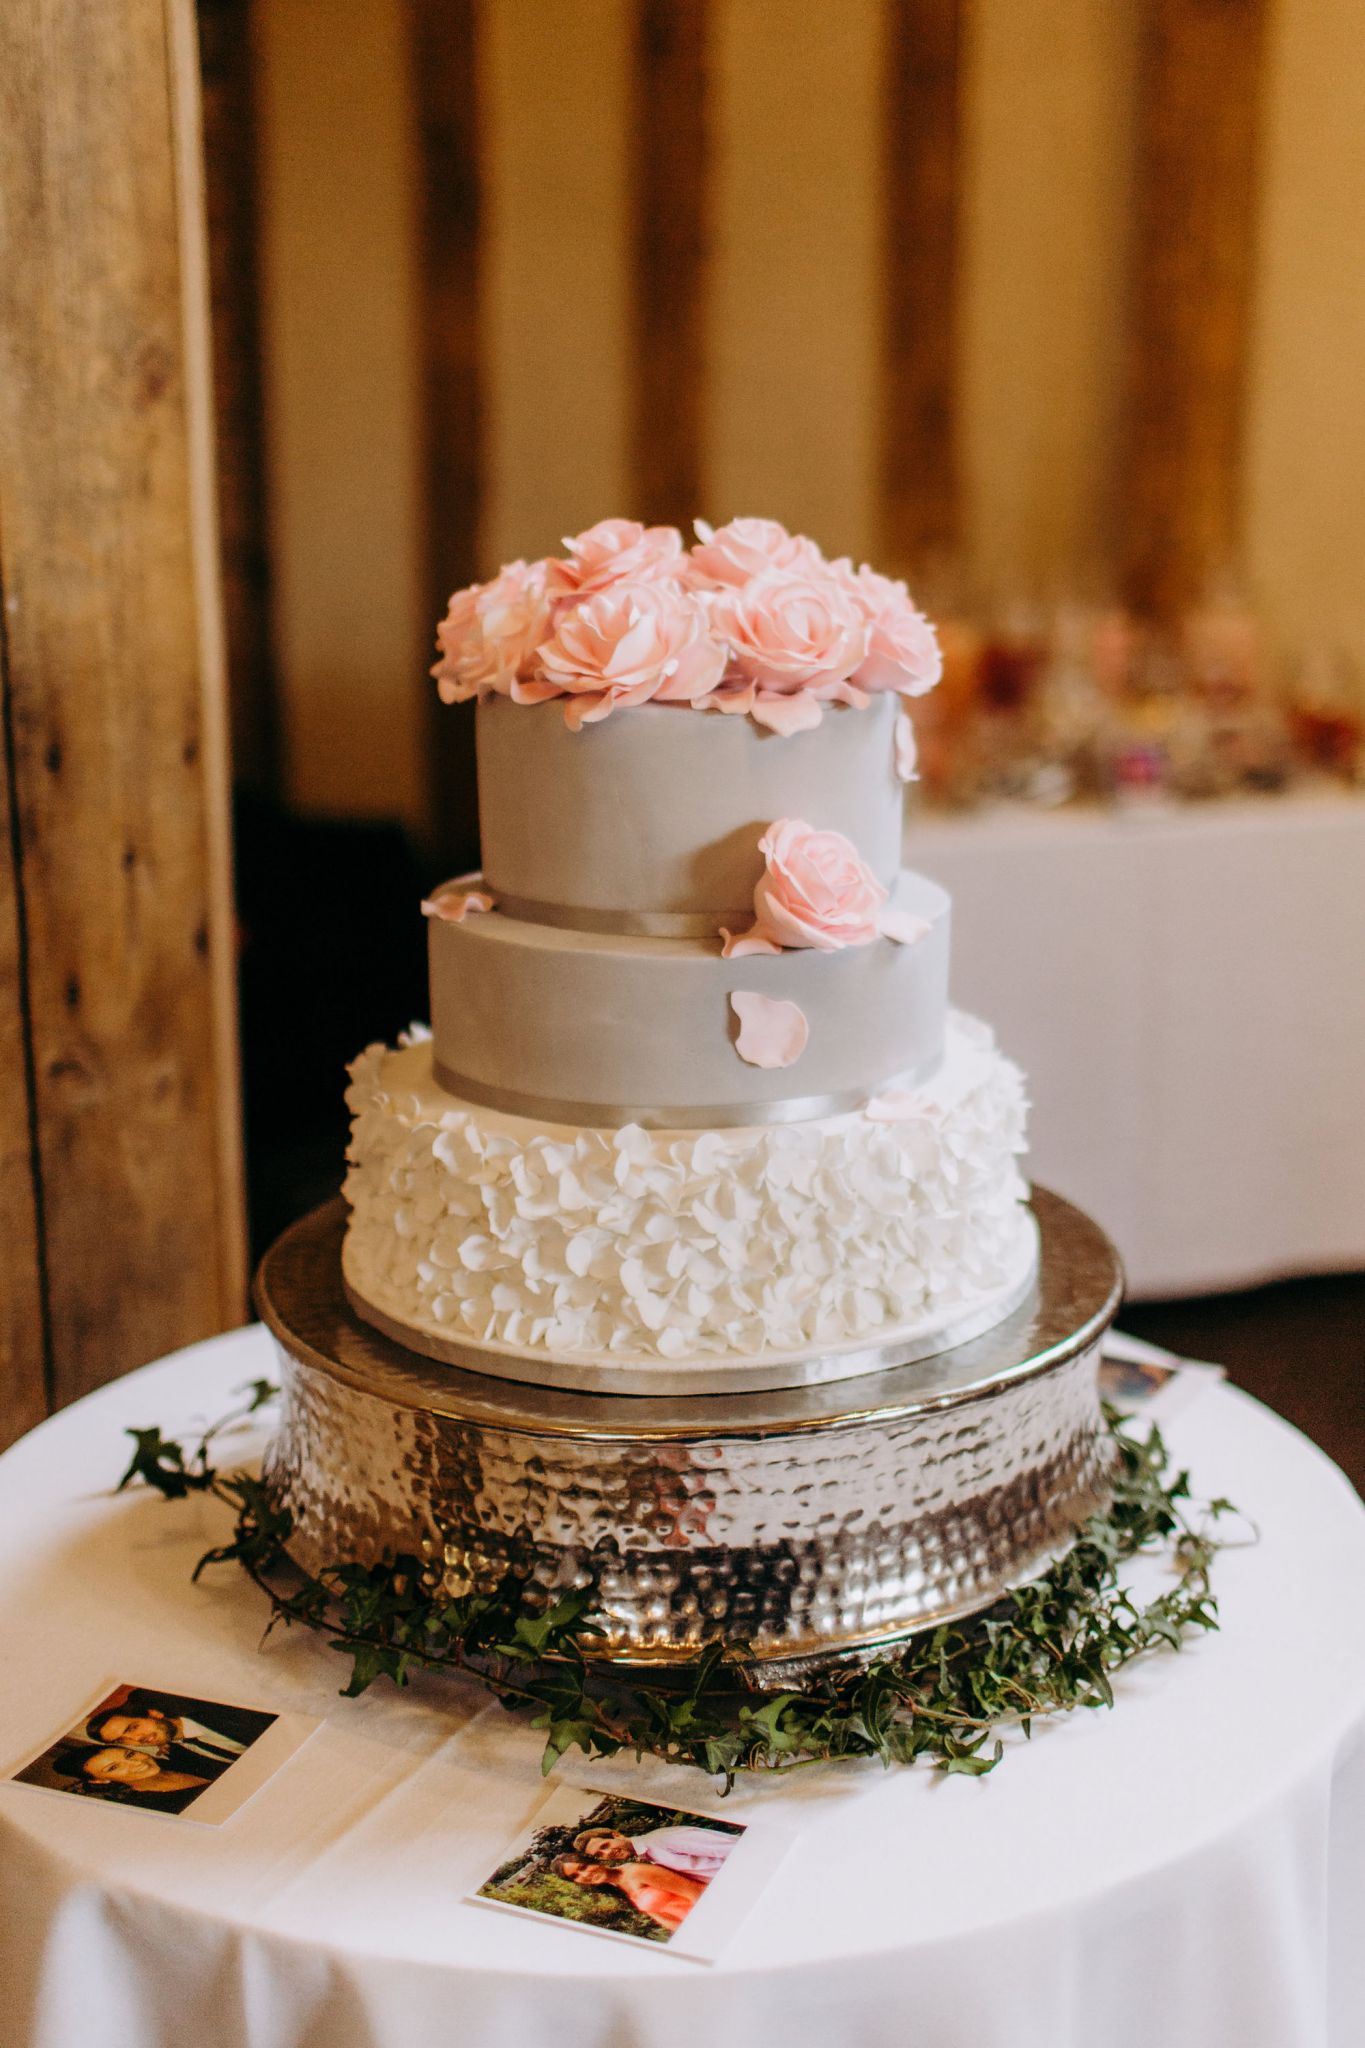 01 pale grey and white wedding cake topped with pale pink iced flowers